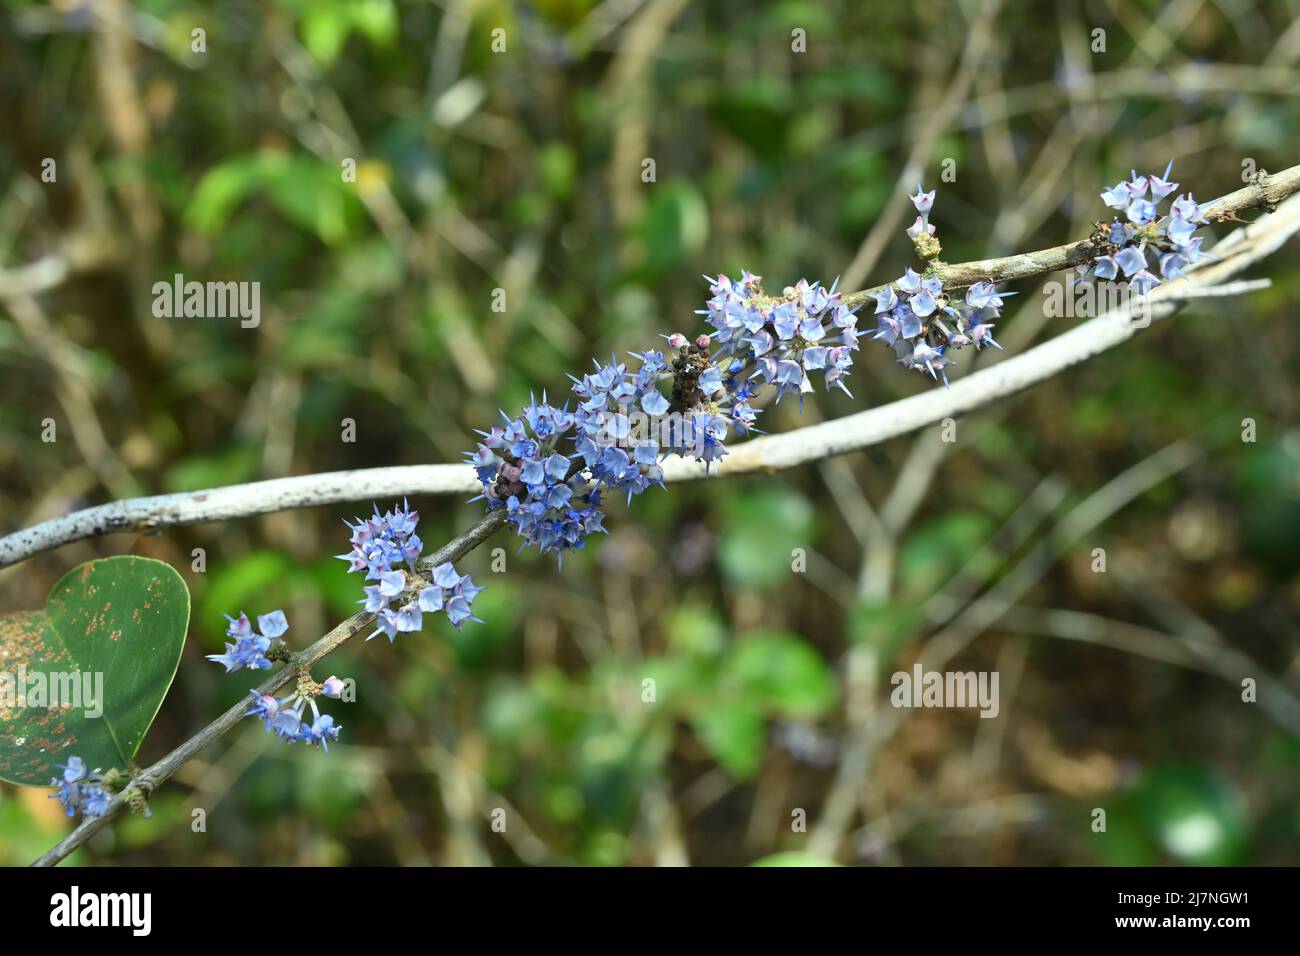 Little tiny purple colored wildflower clusters bloomed on the stem of a wild plant Stock Photo